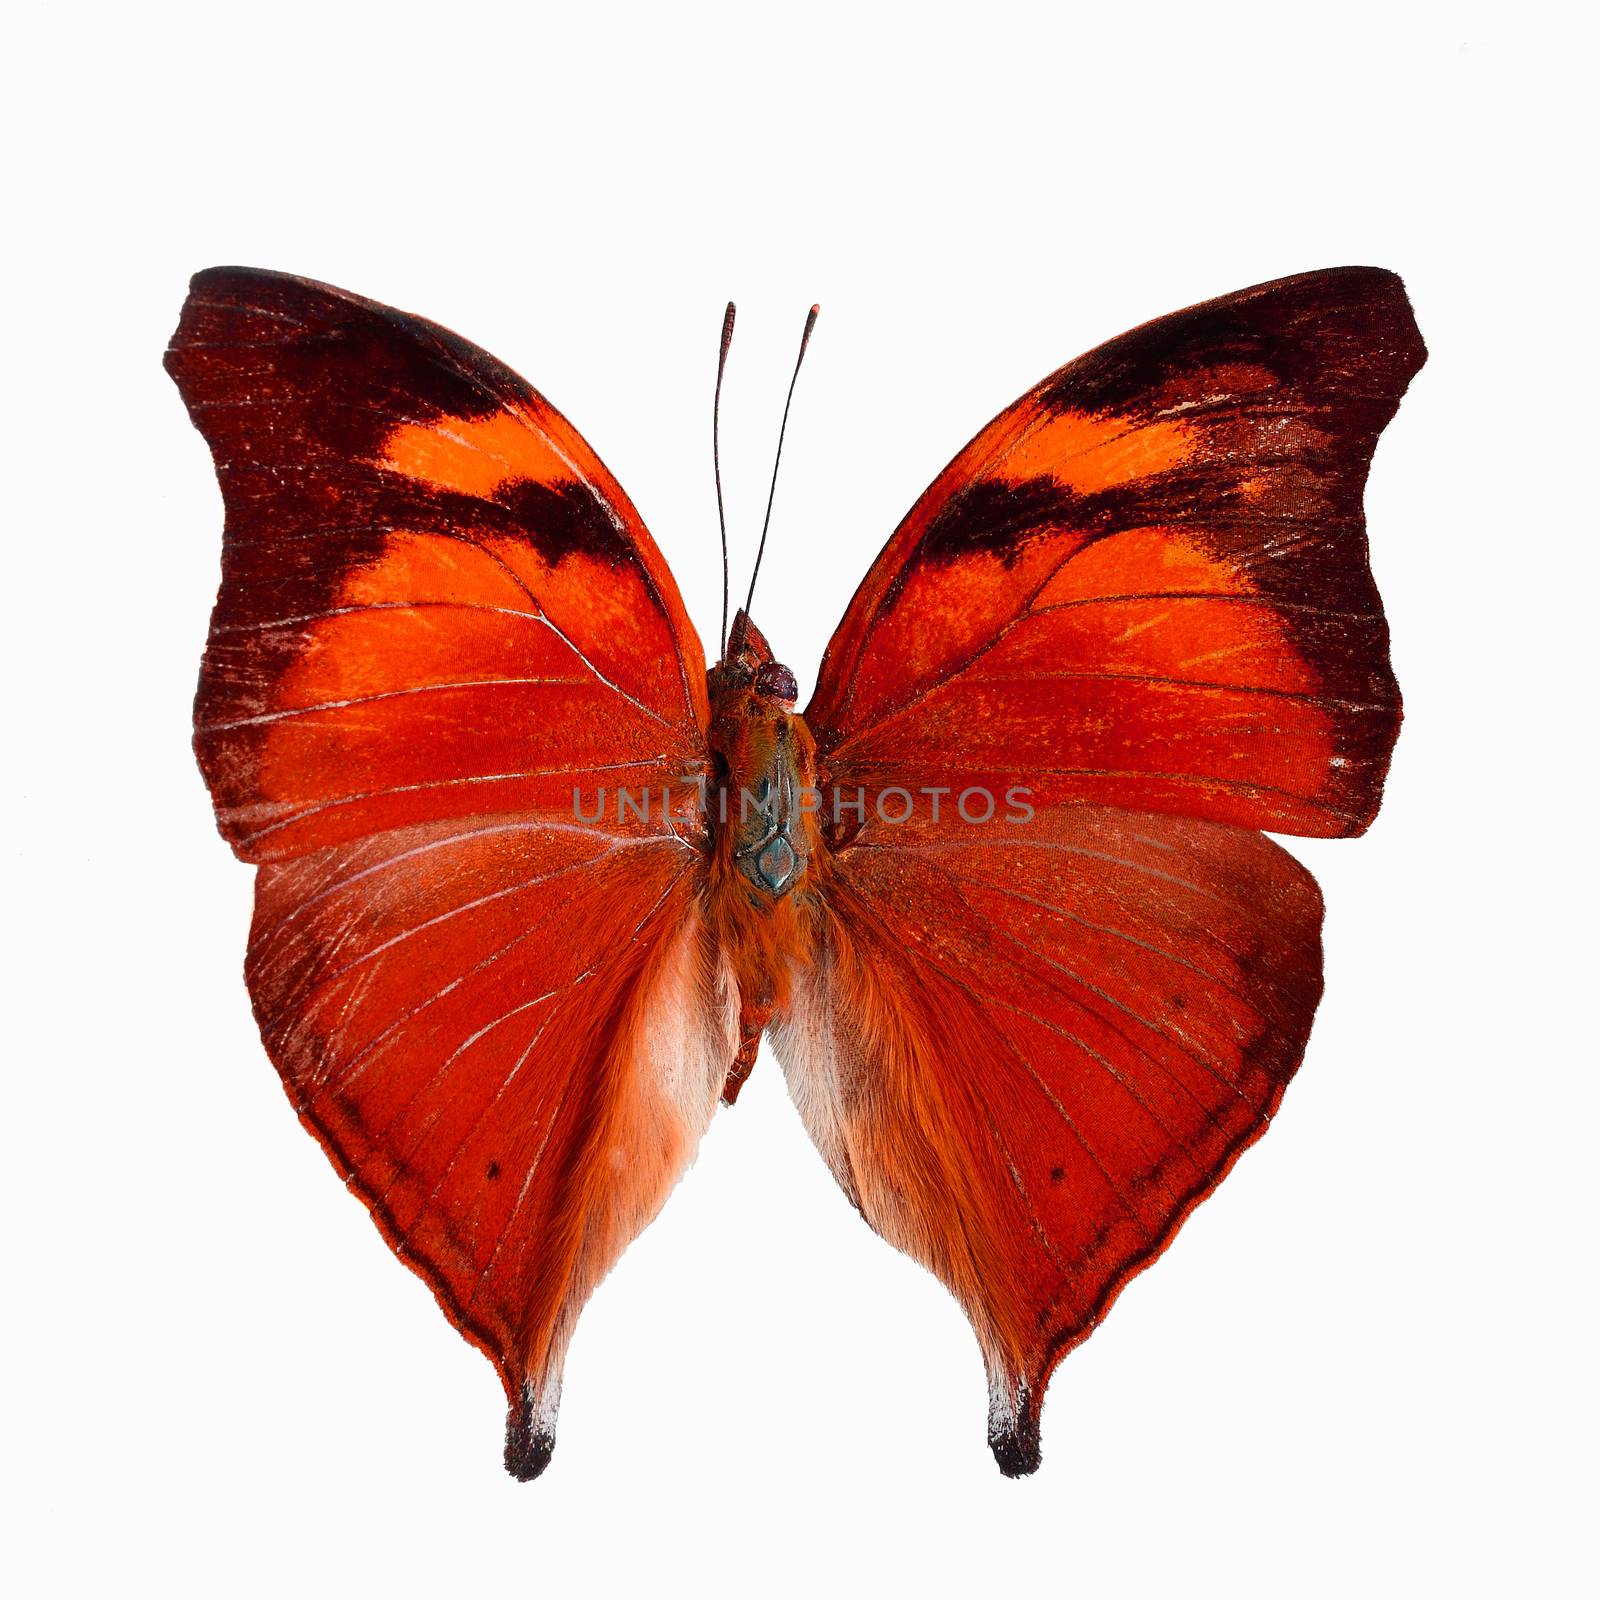 Red butterfly, Autumn Leaf butterfly, Nymphalid butterfly (Doleschallia bisaltide), in fancy color profile, isolated on whhte background